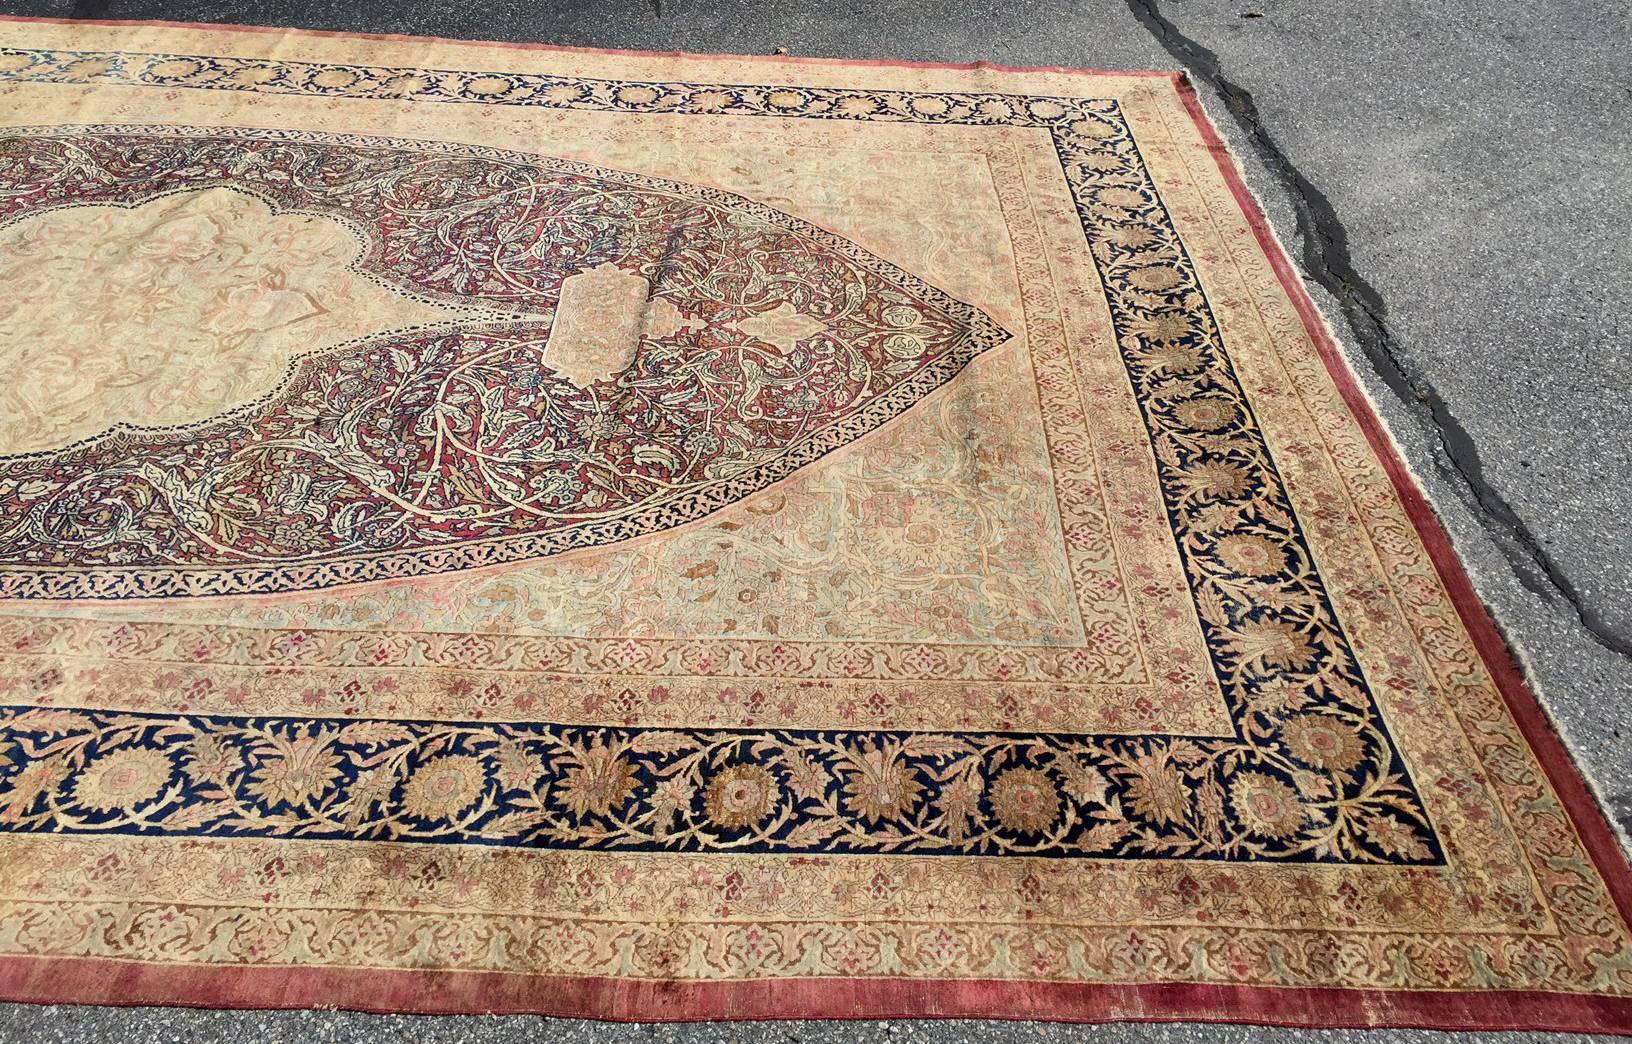 Hand-Woven 20th Century Imperial Kerman Large Room Size Handwoven Rug